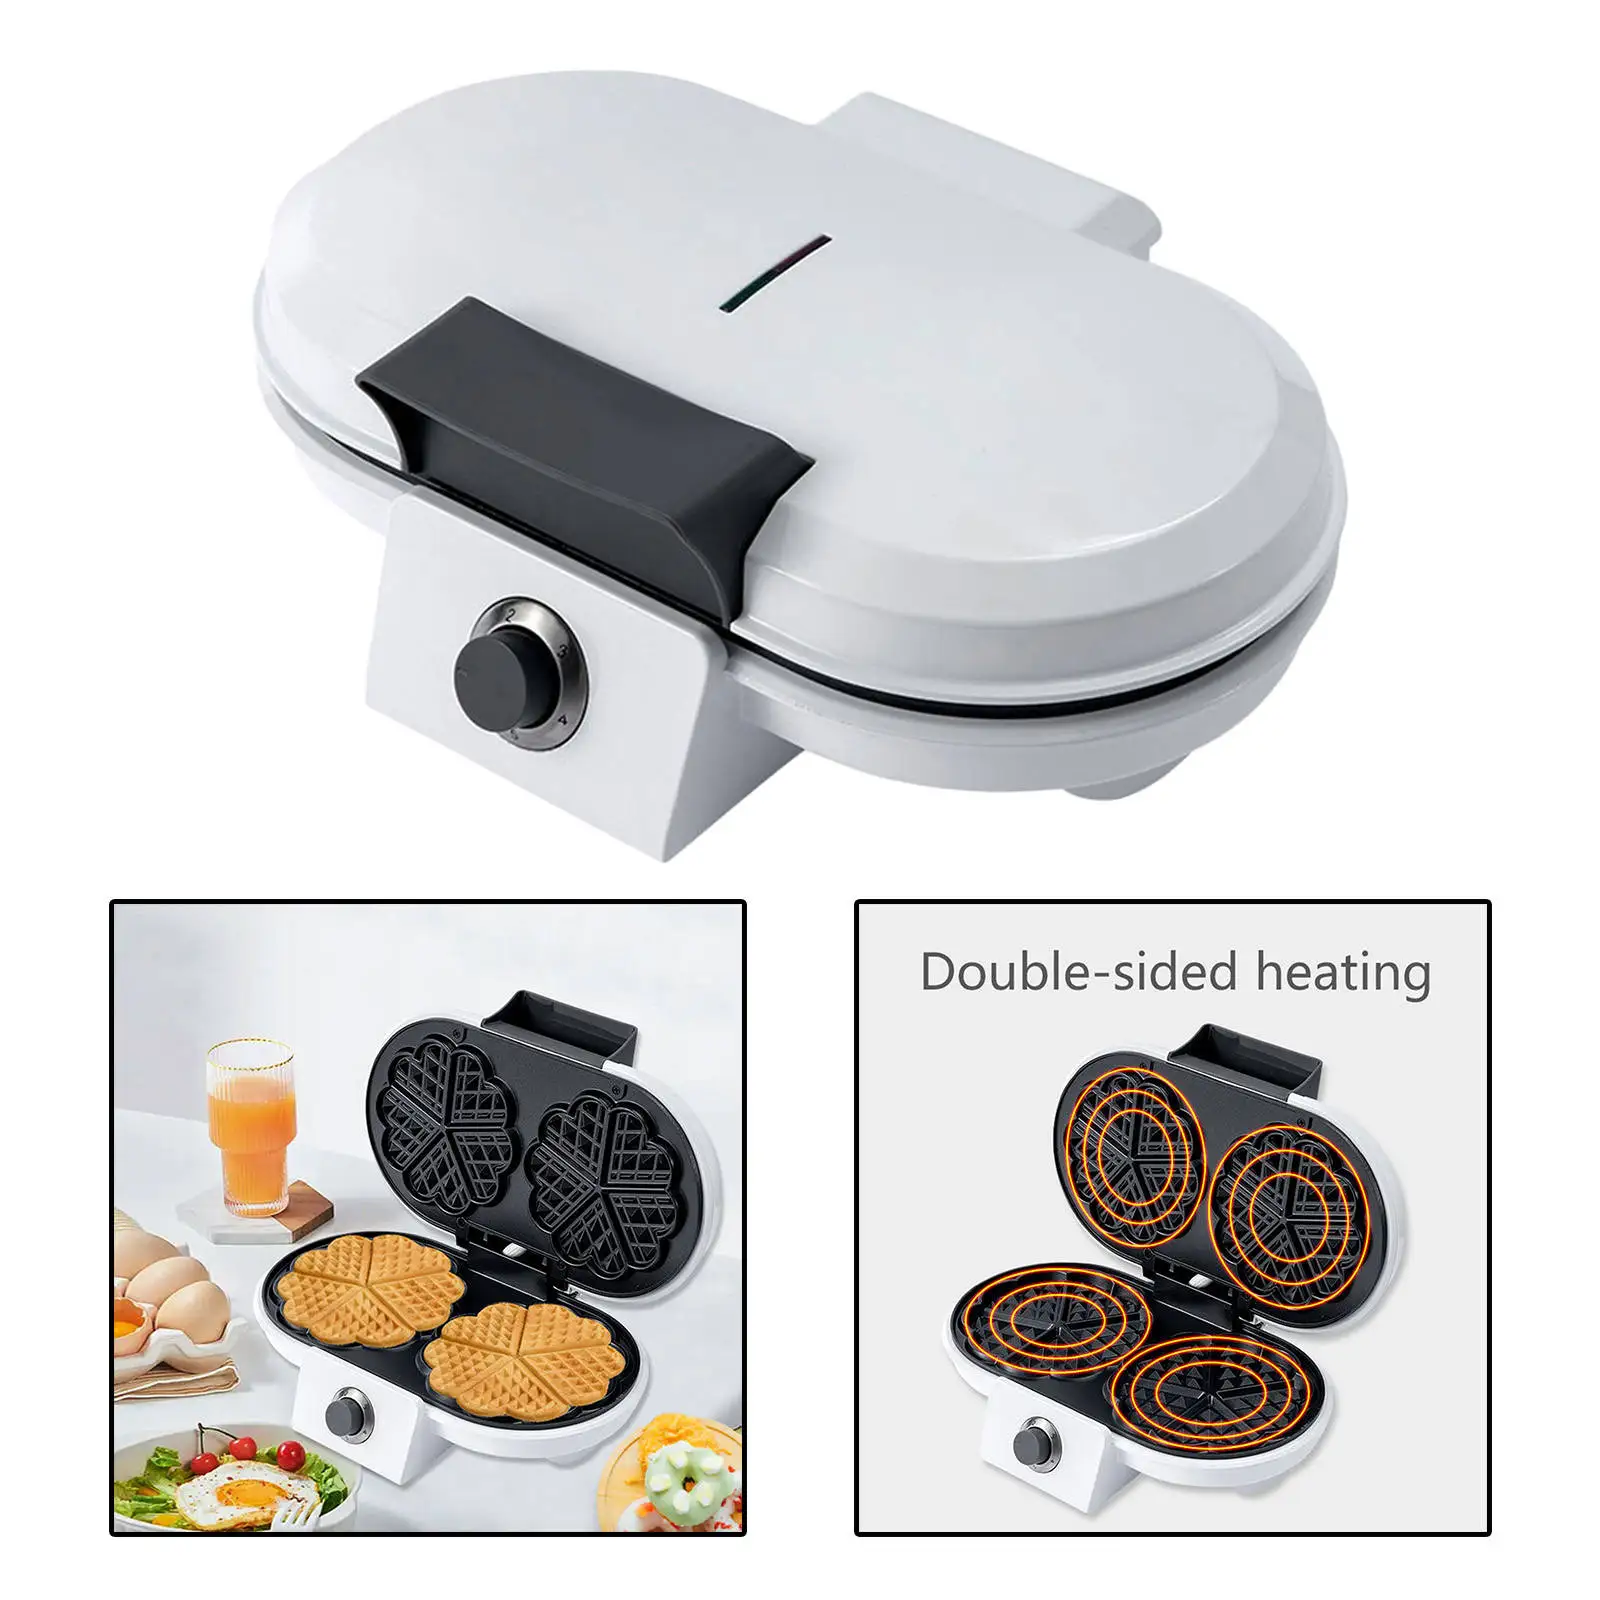 

Electric Waffle Maker Waffle Baking Mould Pancake Cooking Non-Stick Press Plate Pastries Pan for Breakfast Homemade Easy Clean